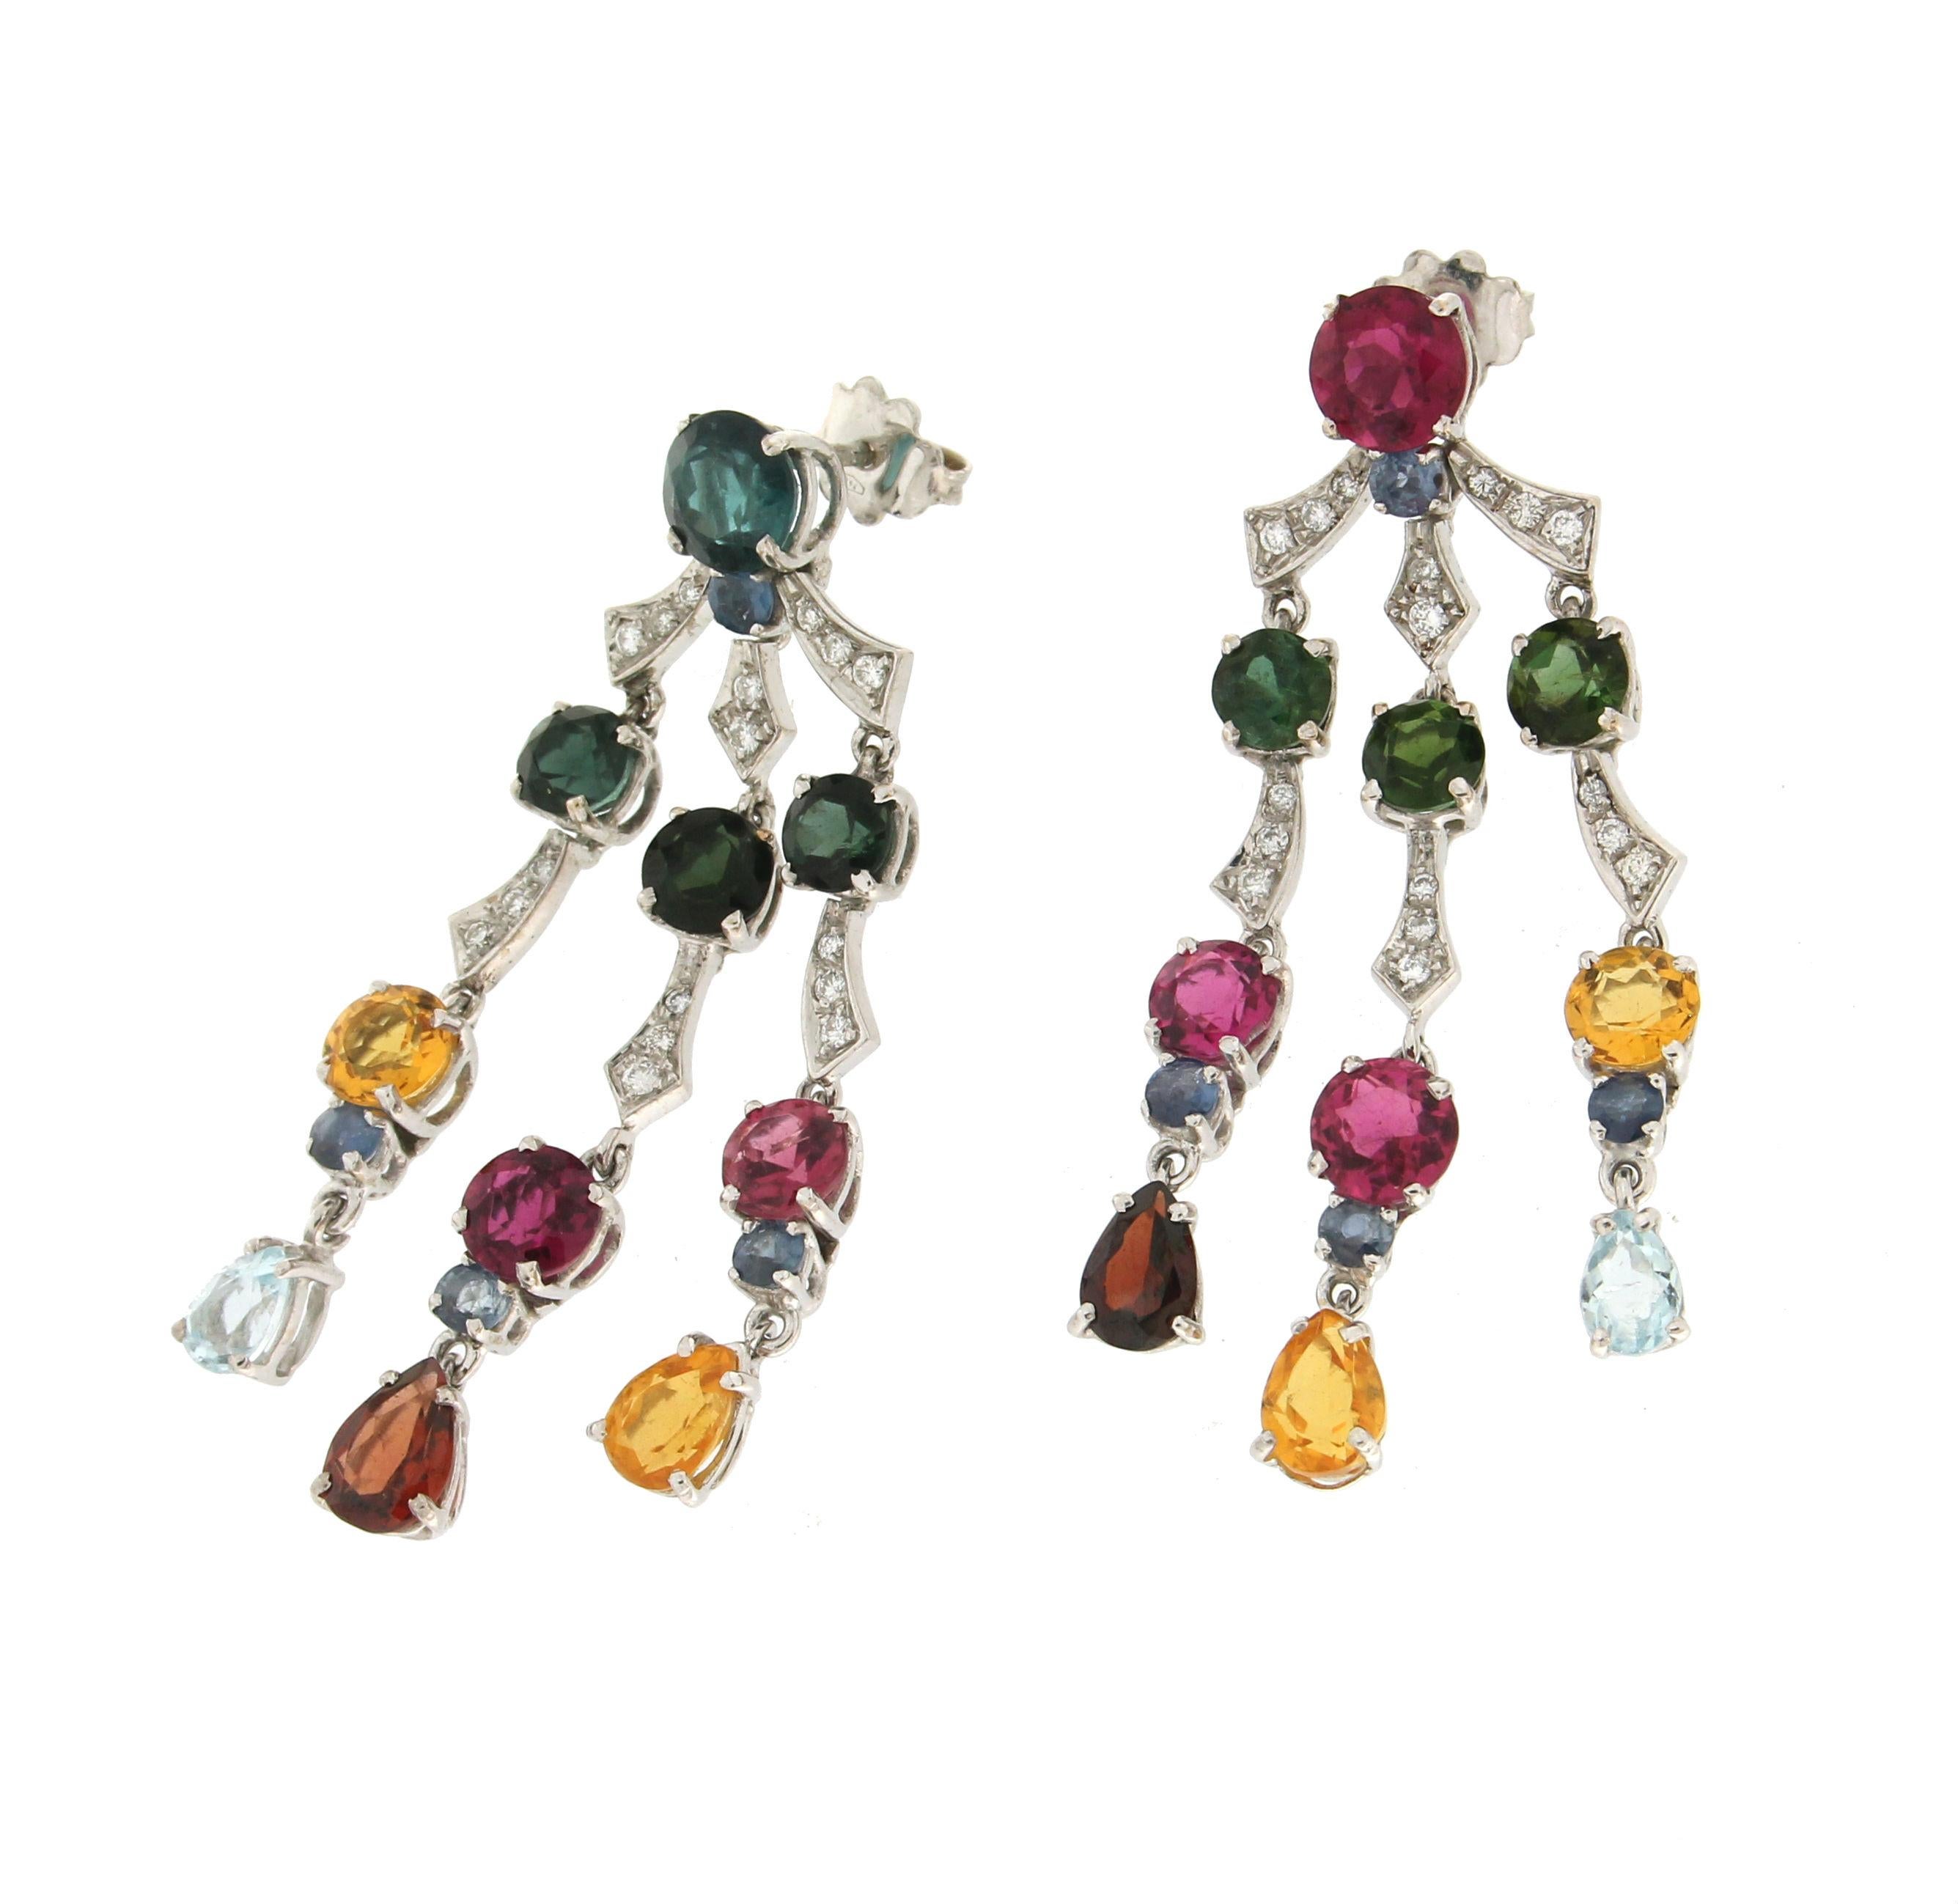 18 karat white gold drop earrings. Handmade by our artisans assembled with diamonds,blue sapphires,green blue and pink tourmaline, yellow citrine,garnet and aquamarine.

Tourmaline total weight 19.50 karat
Diamonds weight 0.45 karat
Sapphires weight